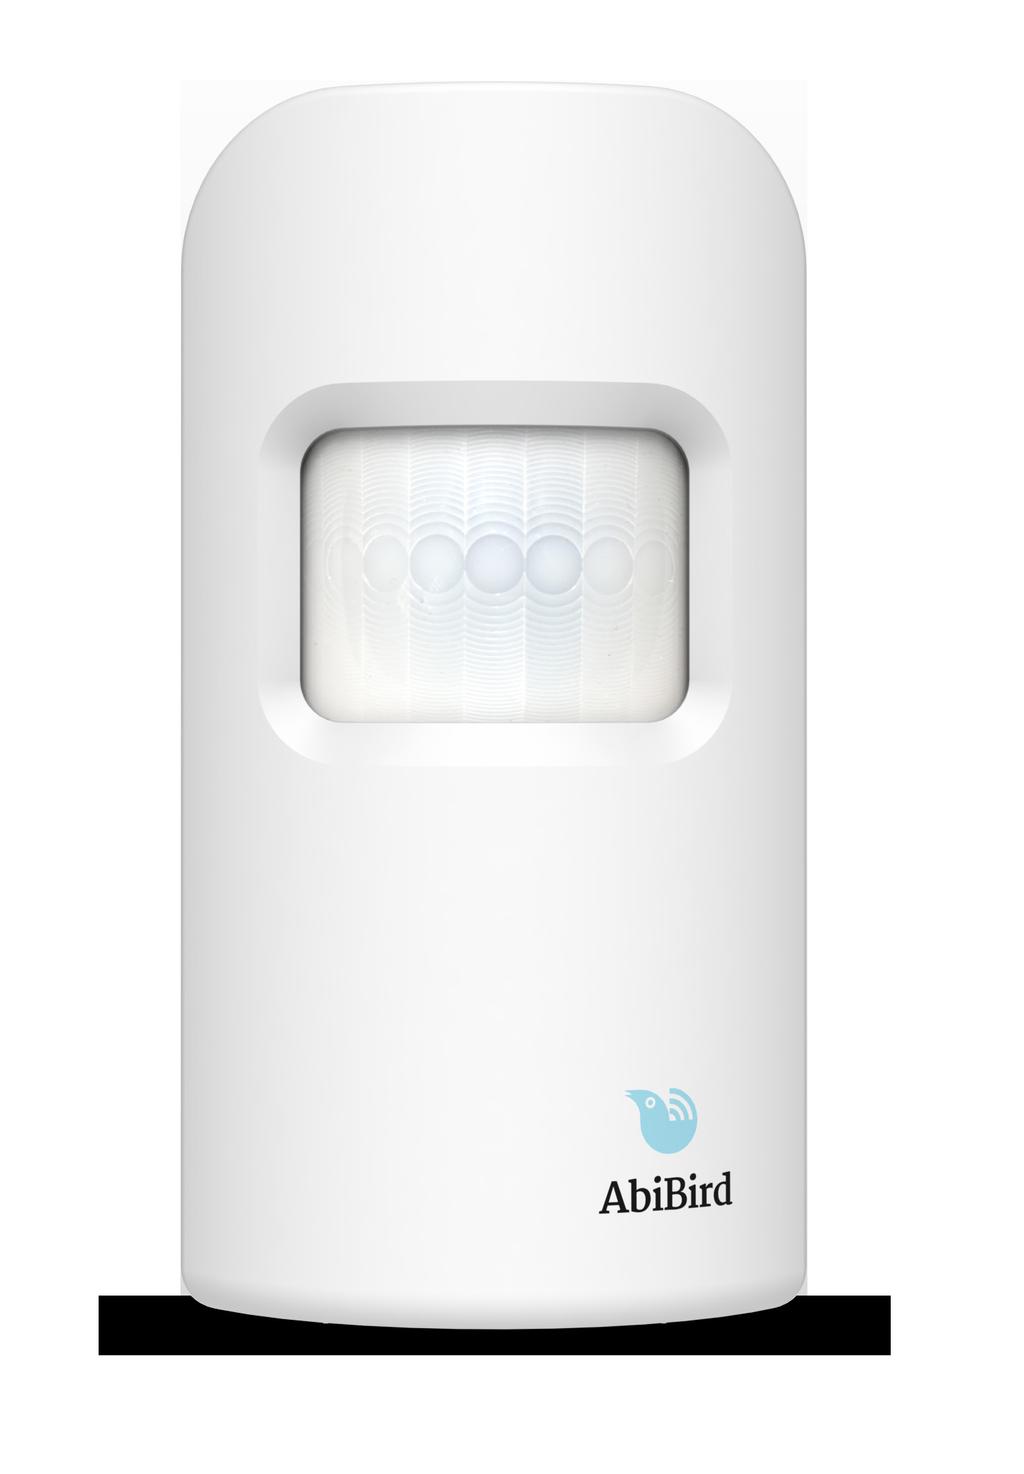 AbiBird user guide AbiBird is an intelligent home activity sensor that connects to a smartphone App.